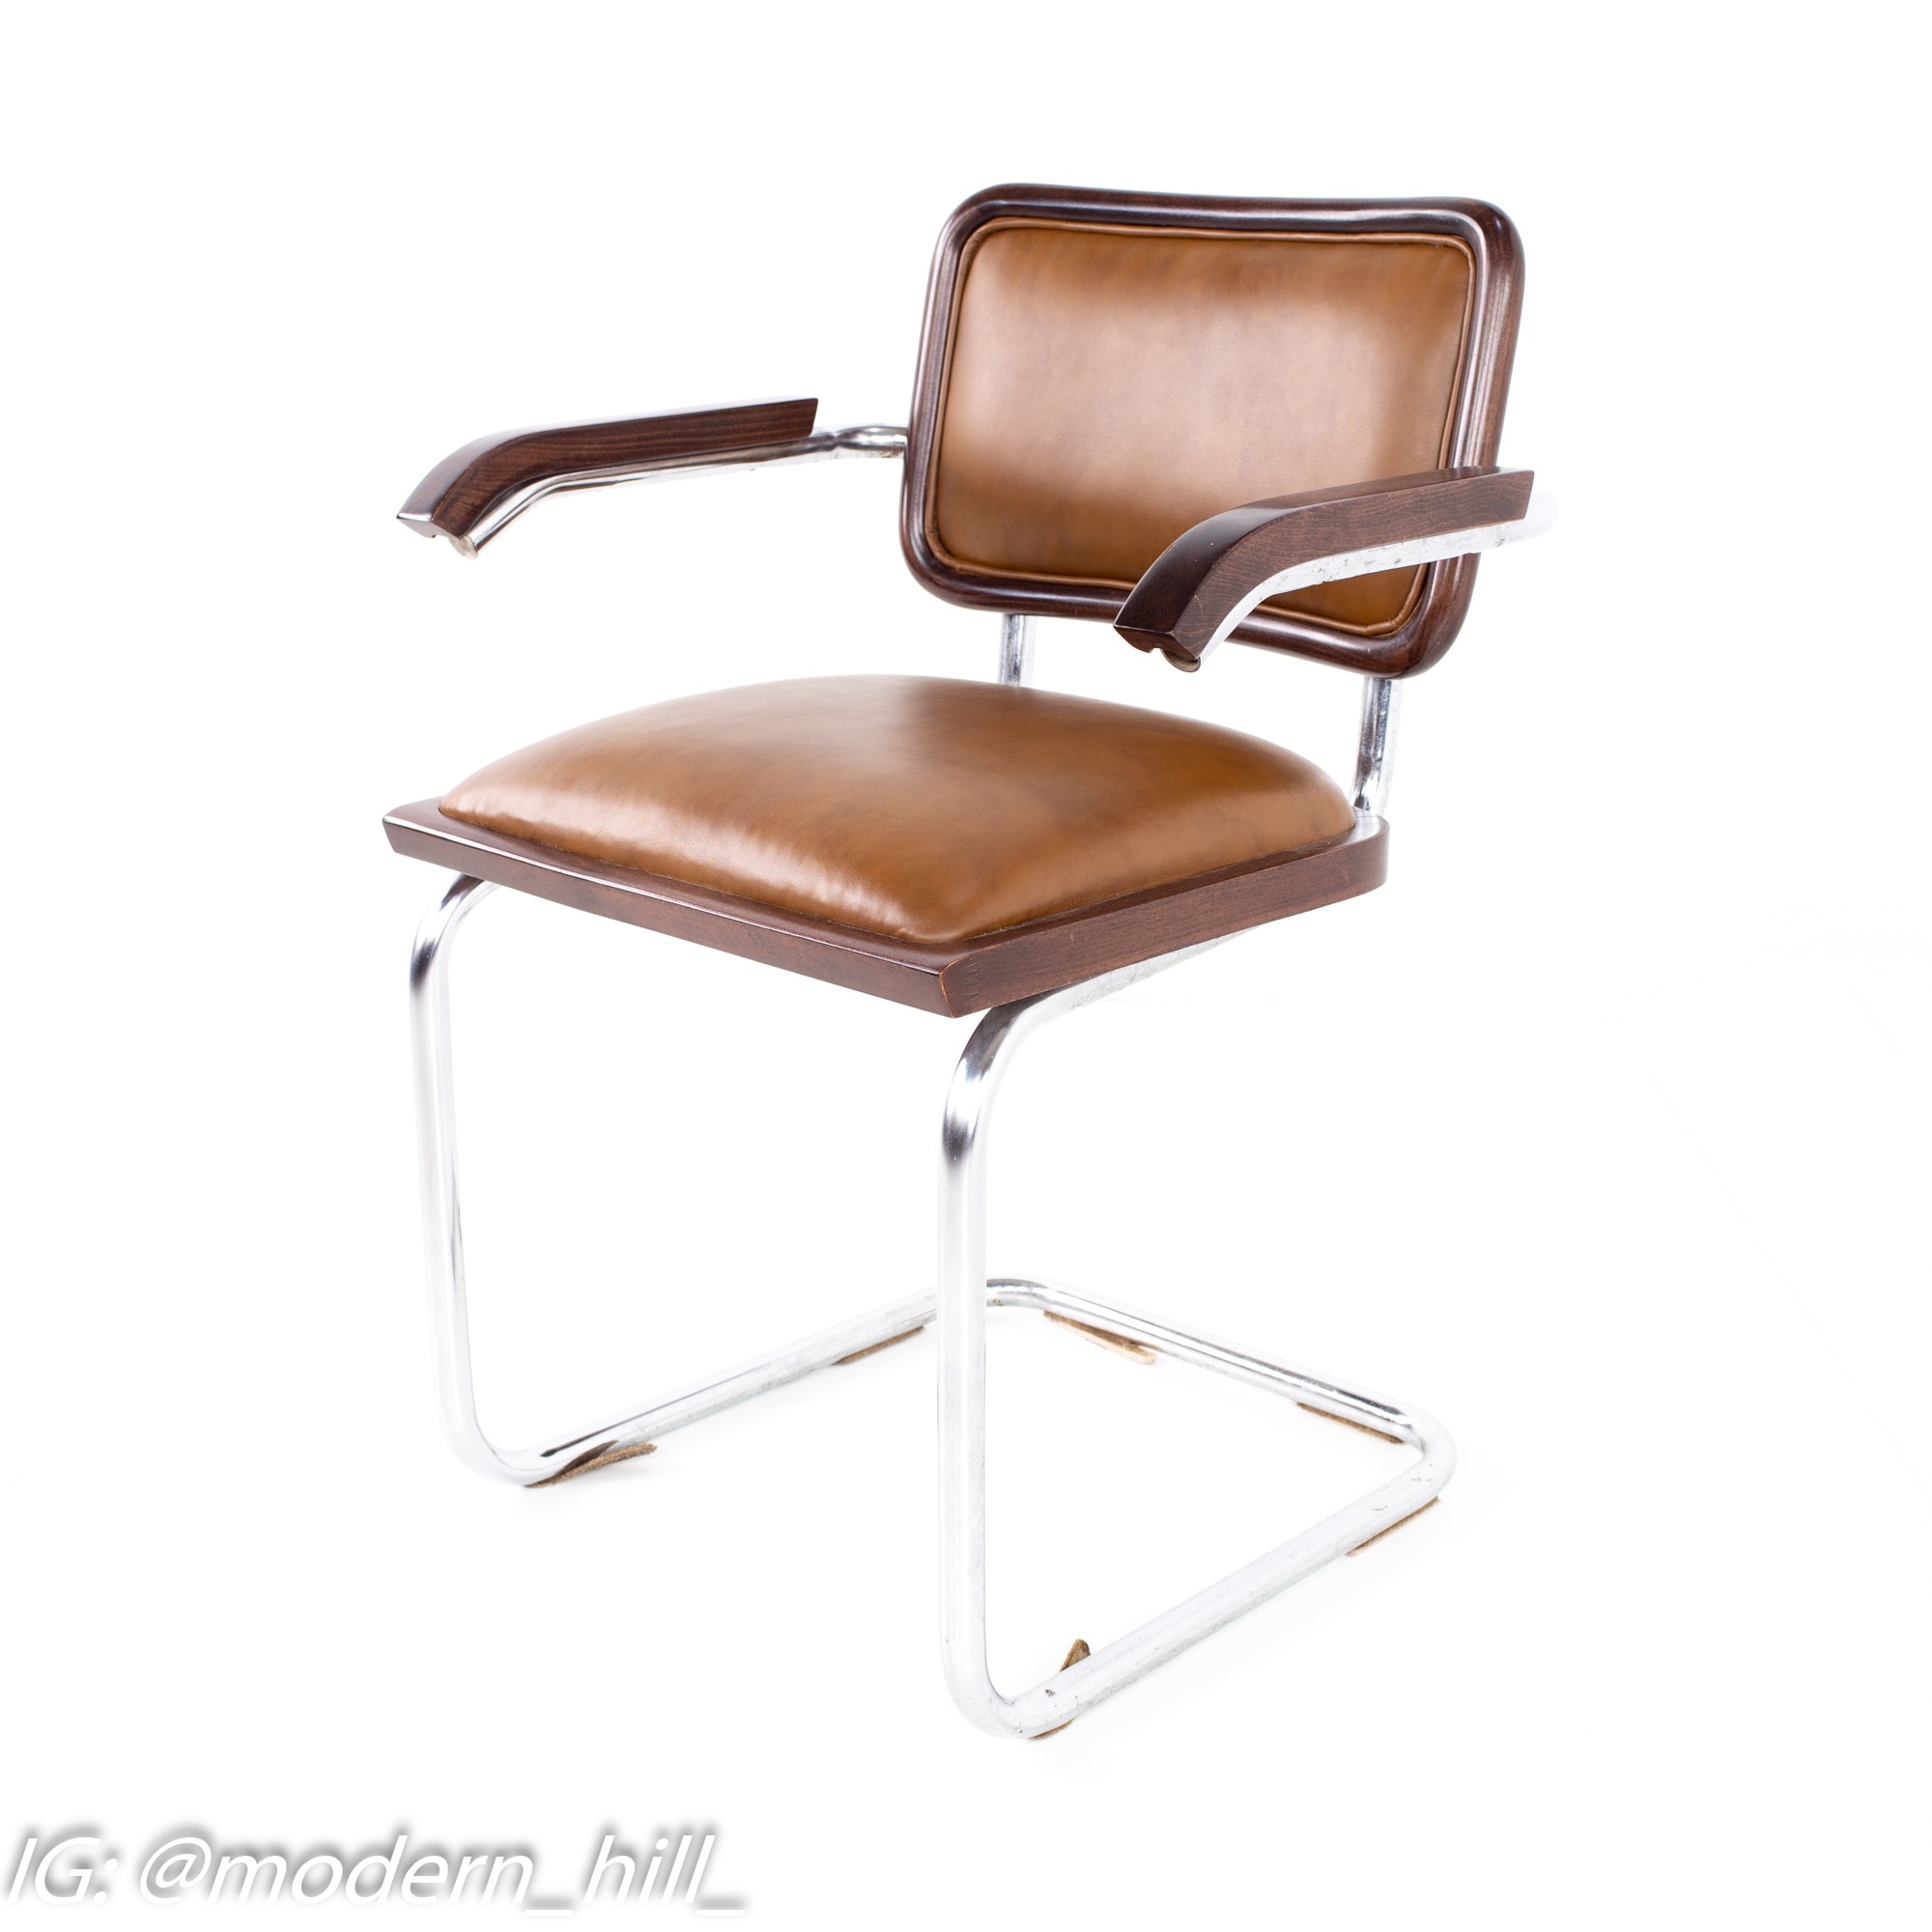 Marcel Breuer Cesca Style Mid Century Dining Chairs – Set of 5 